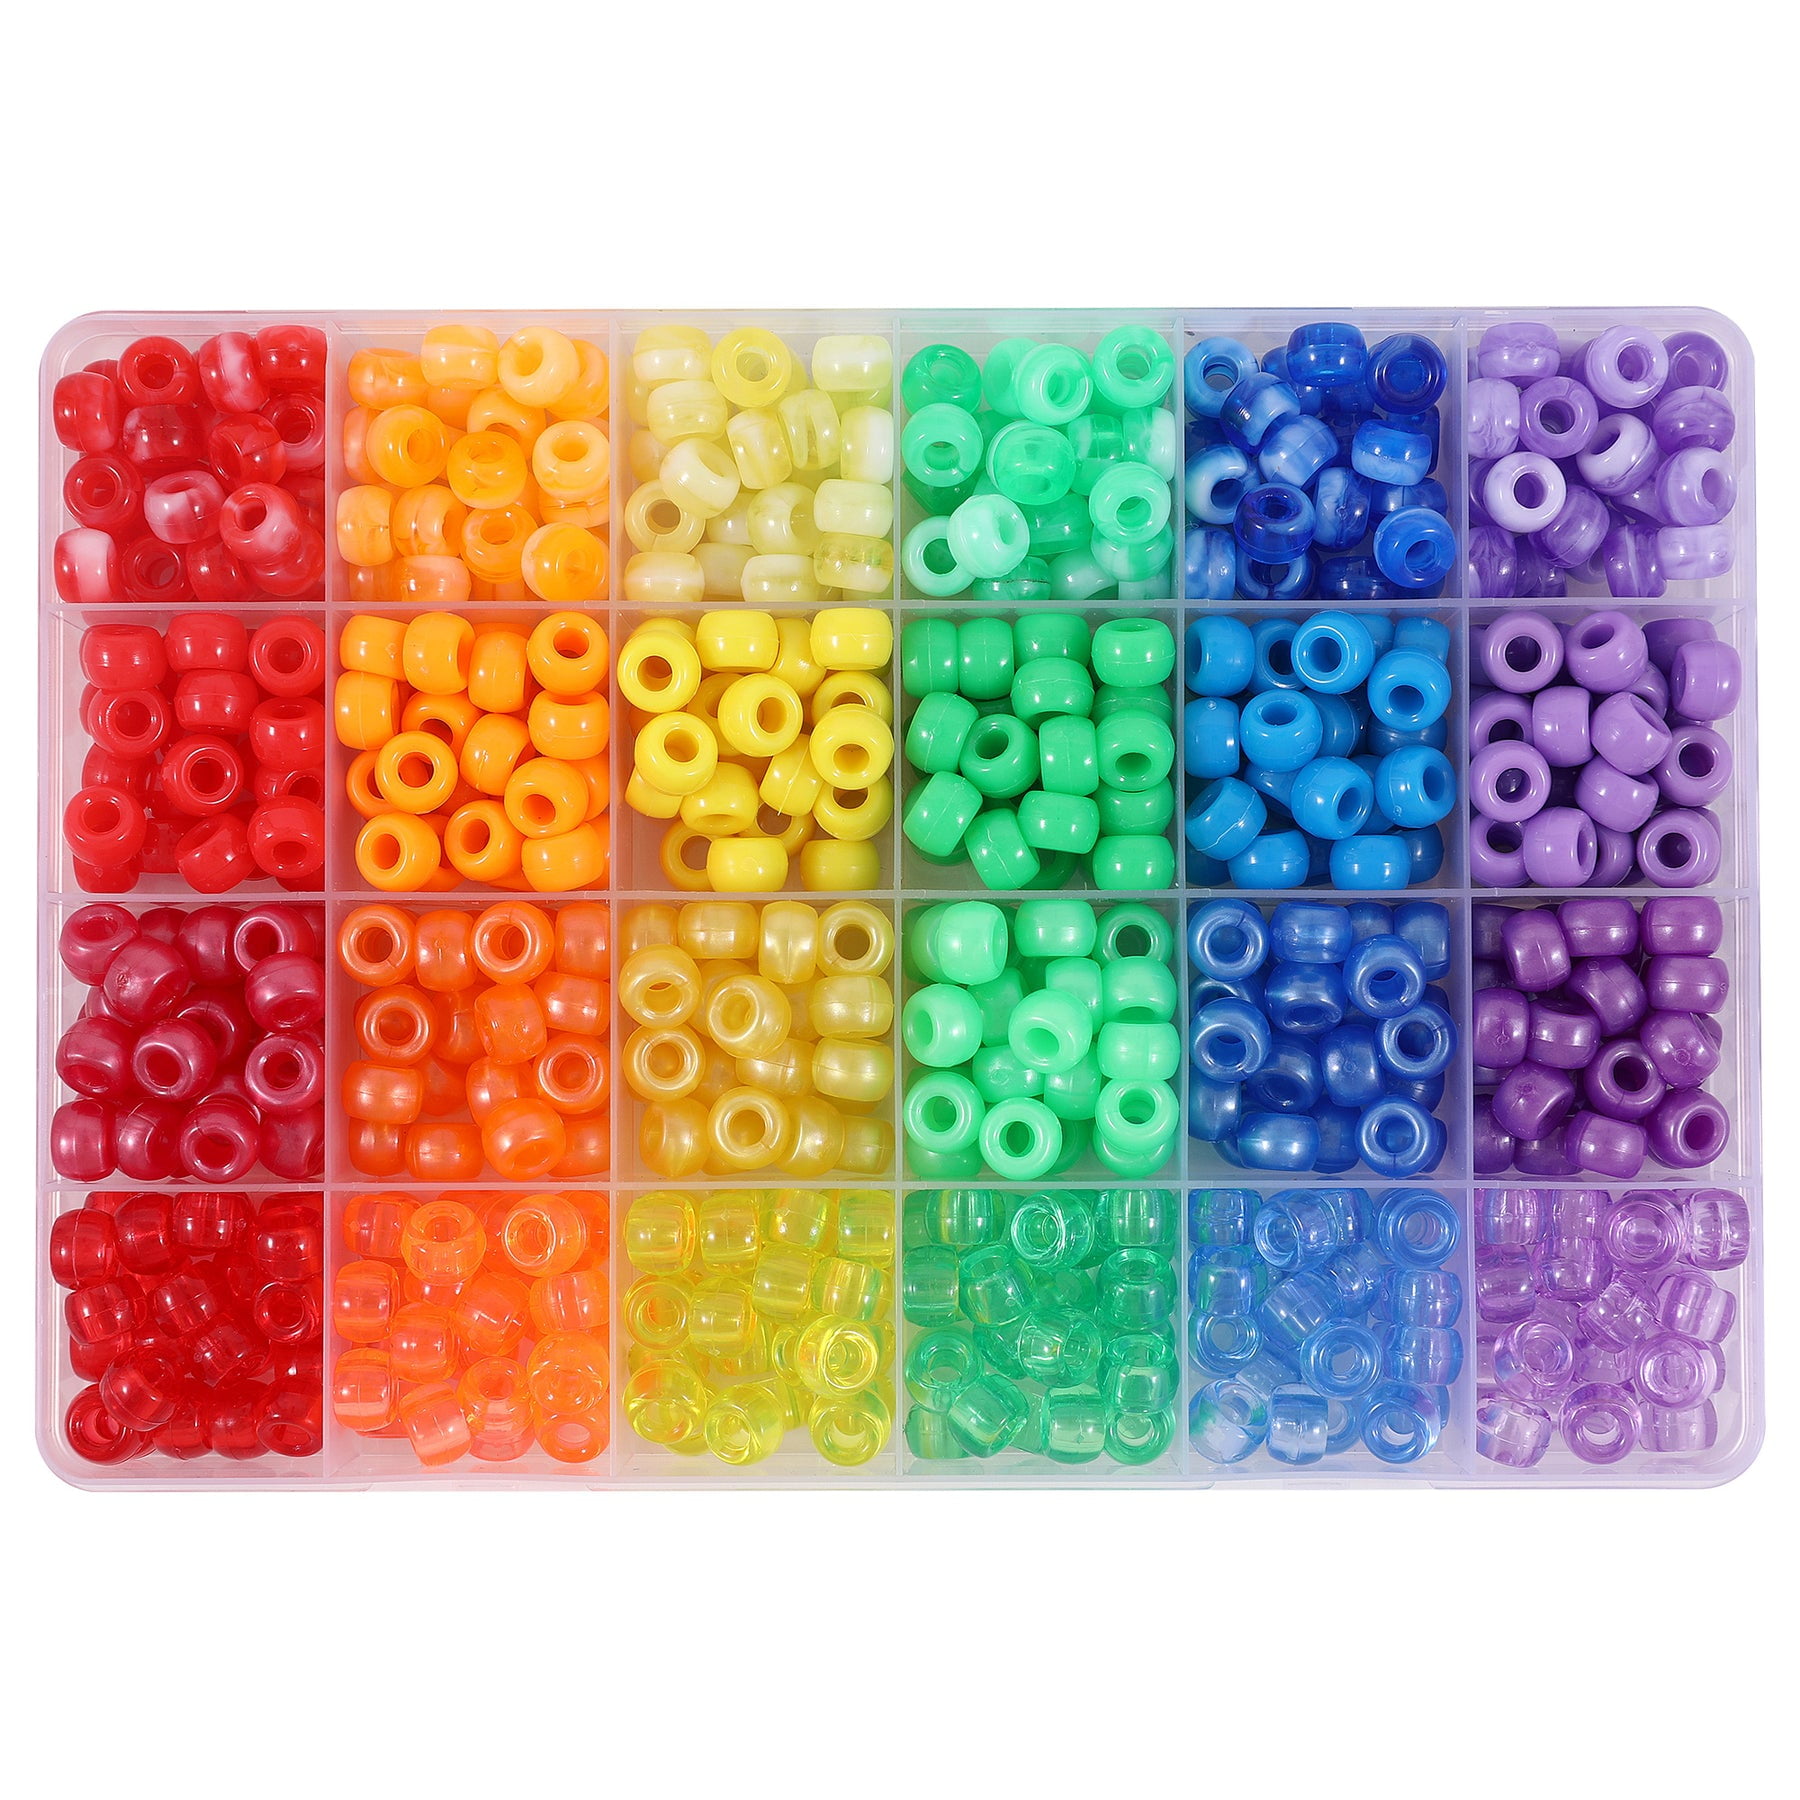 3500+ Pcs Rainbow Pony Beads for Jewelry Making, Hair Beads for